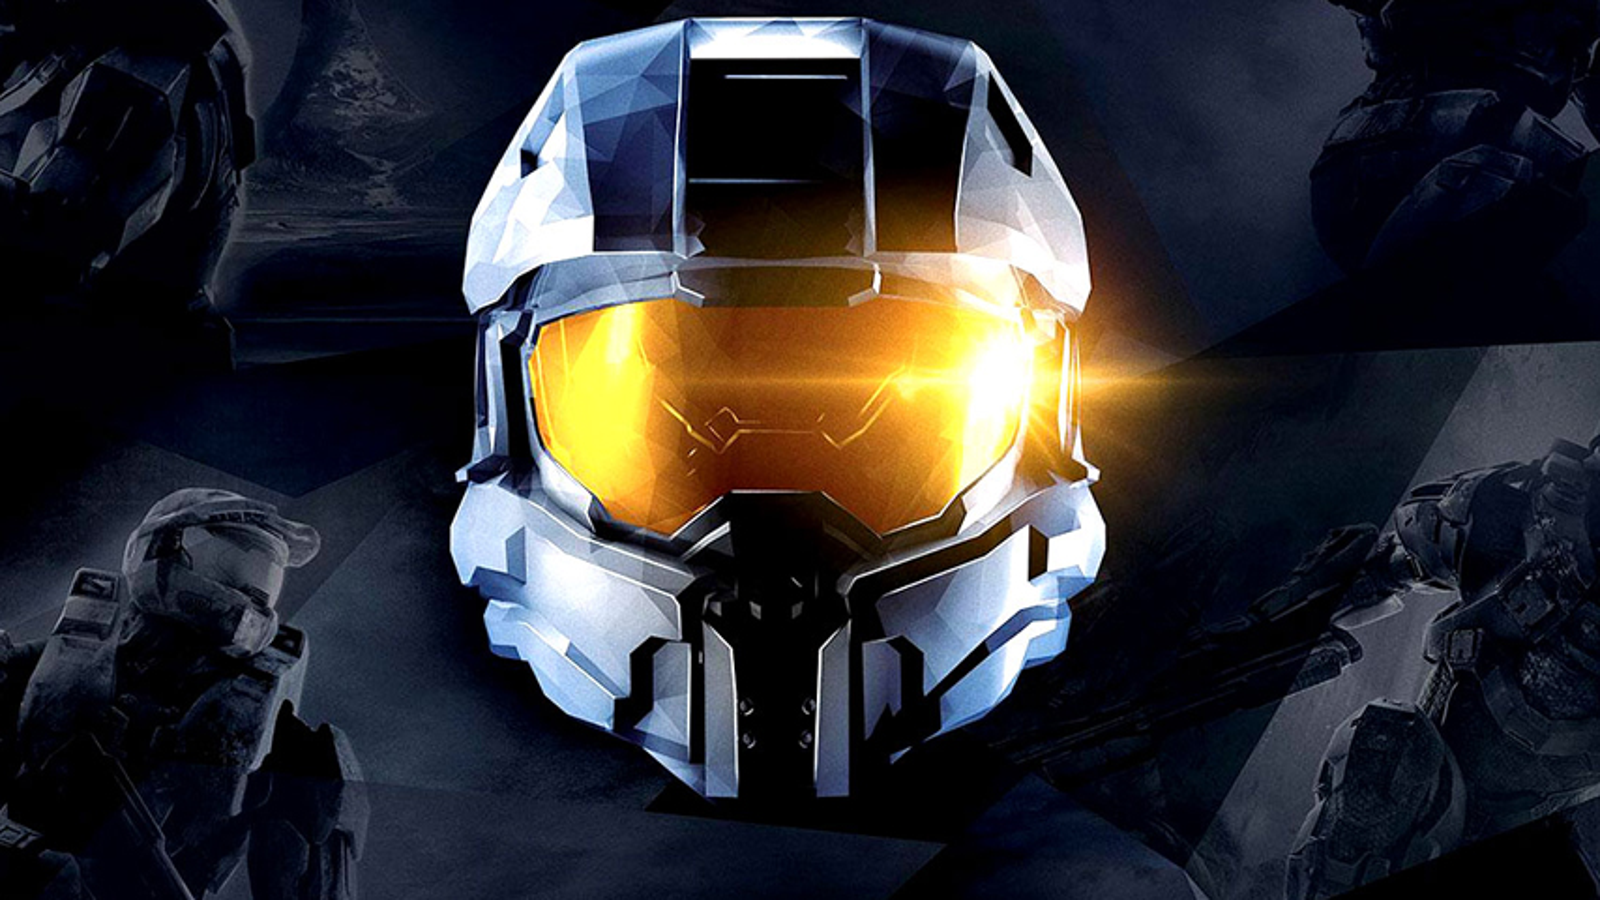 Halo's Master Chief Collection now sports Xbox Series X/S optimization